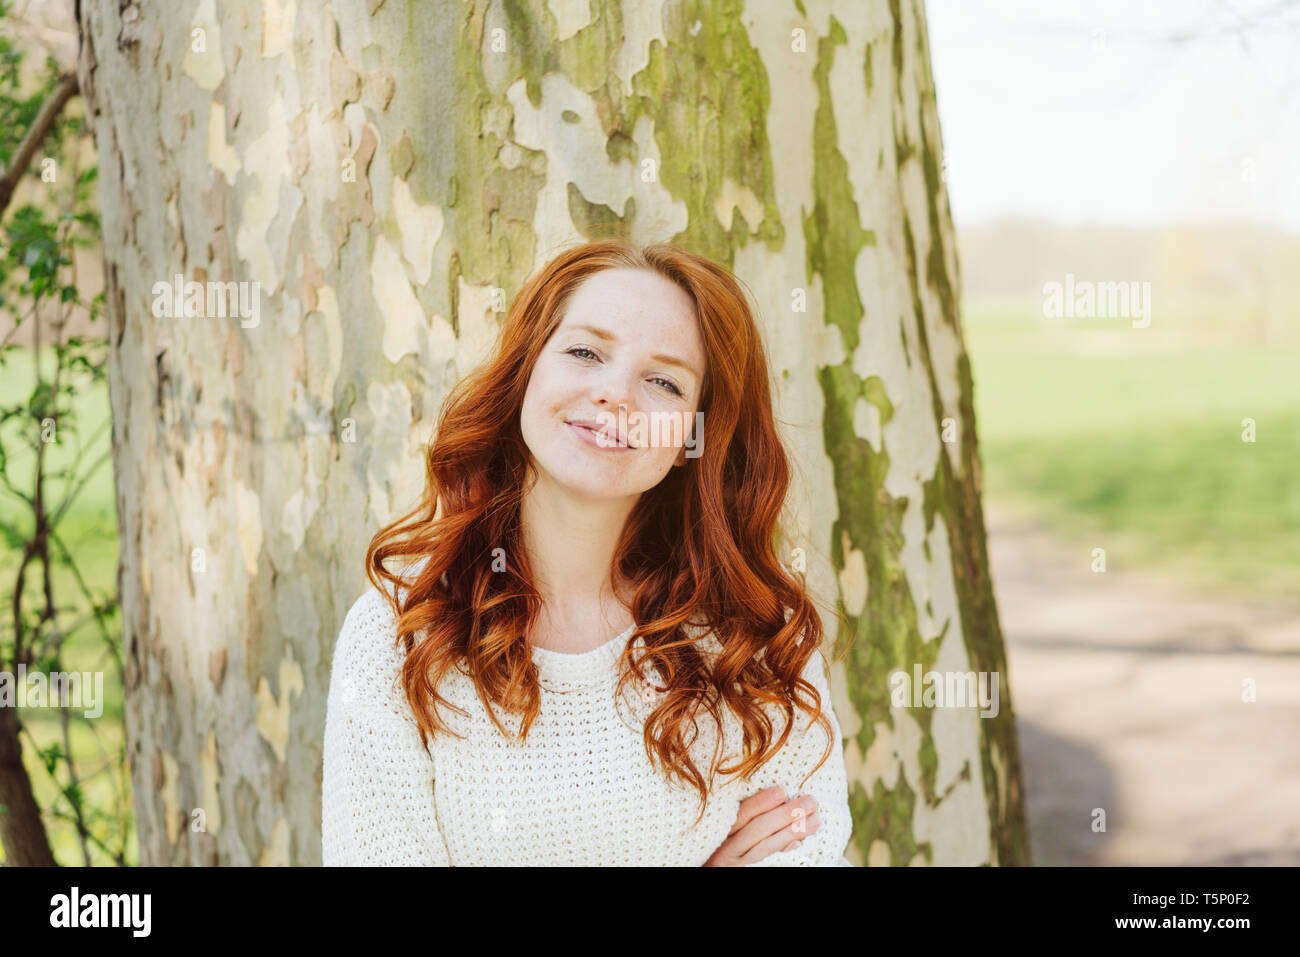 Smiling young woman outdoors in a park standing with folded arms in front of a tree trunk in the warm sunshine Stock Photo